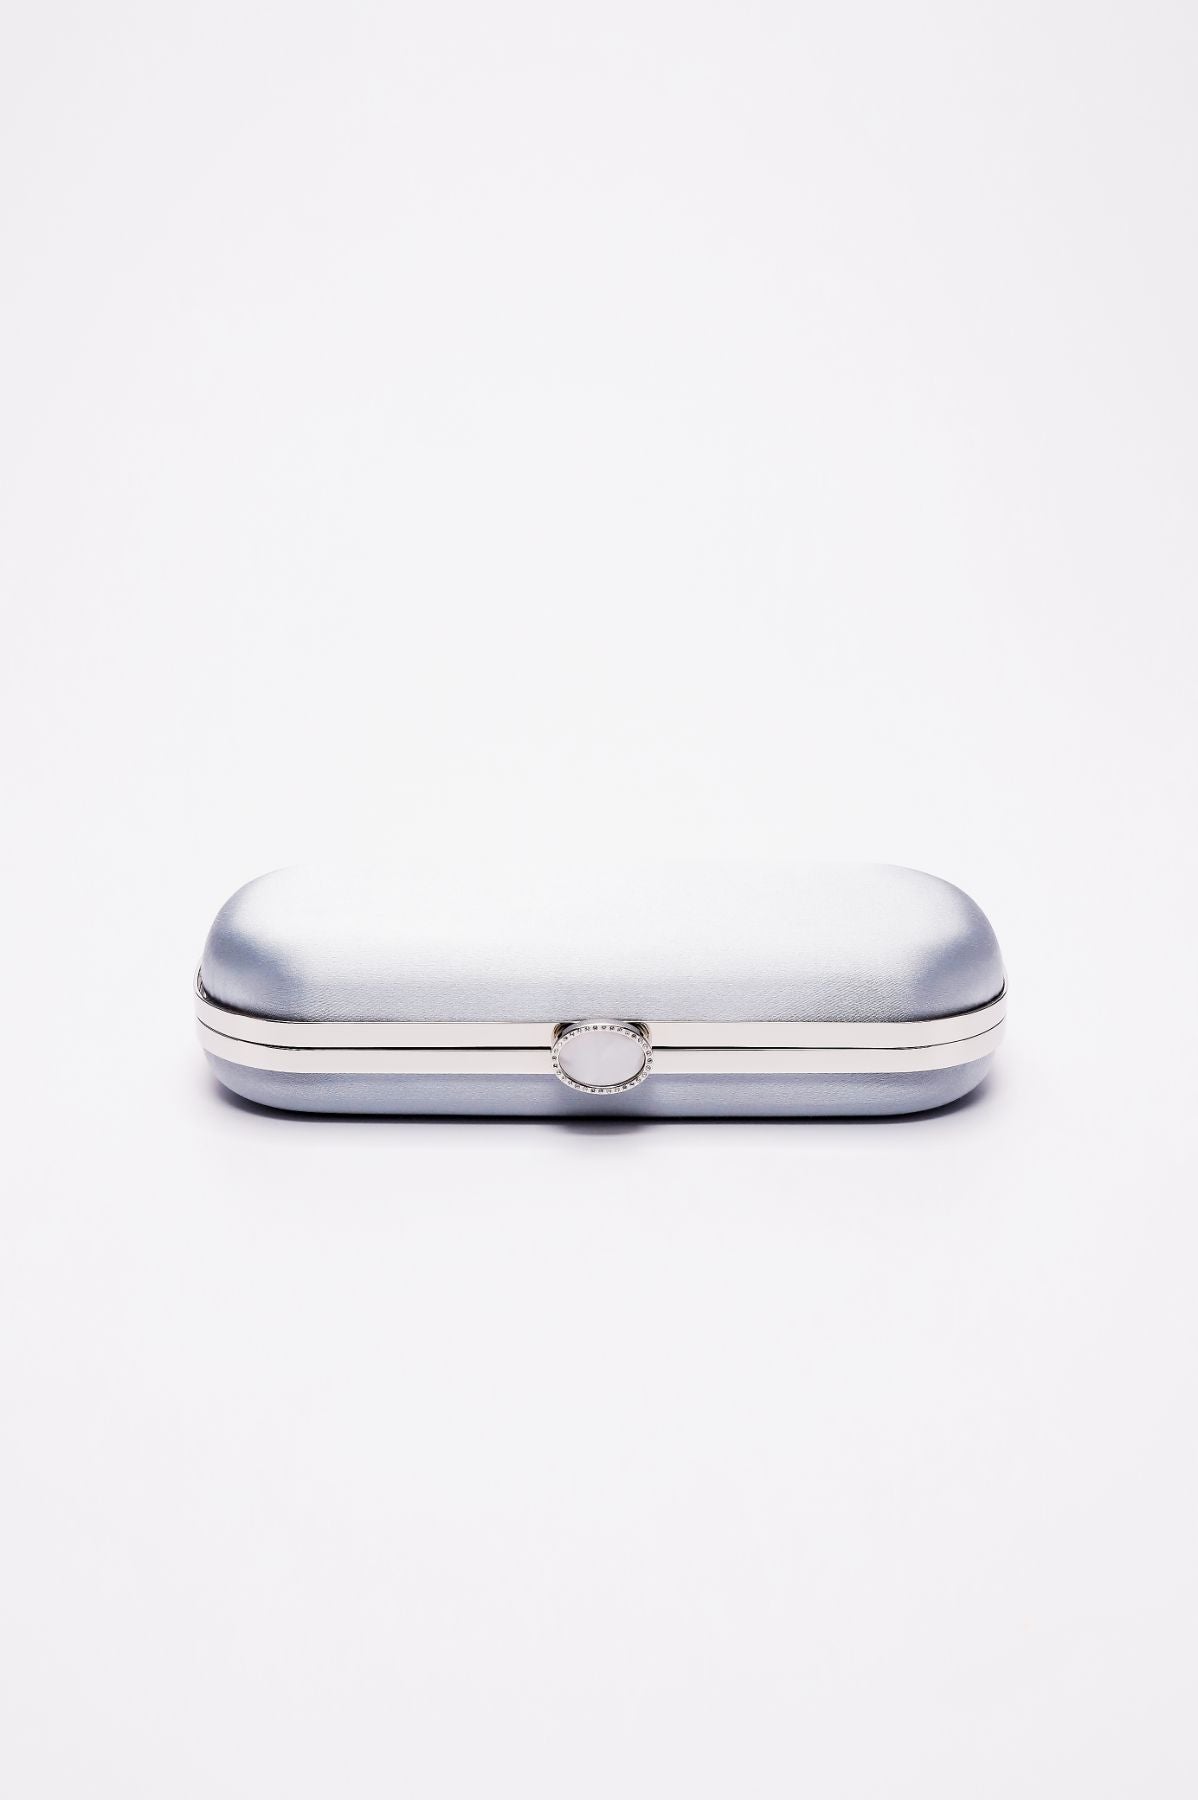 Bella Clutch Steel Blue Satin Grande eyeglass case from The Bella Rosa Collection on a white background.